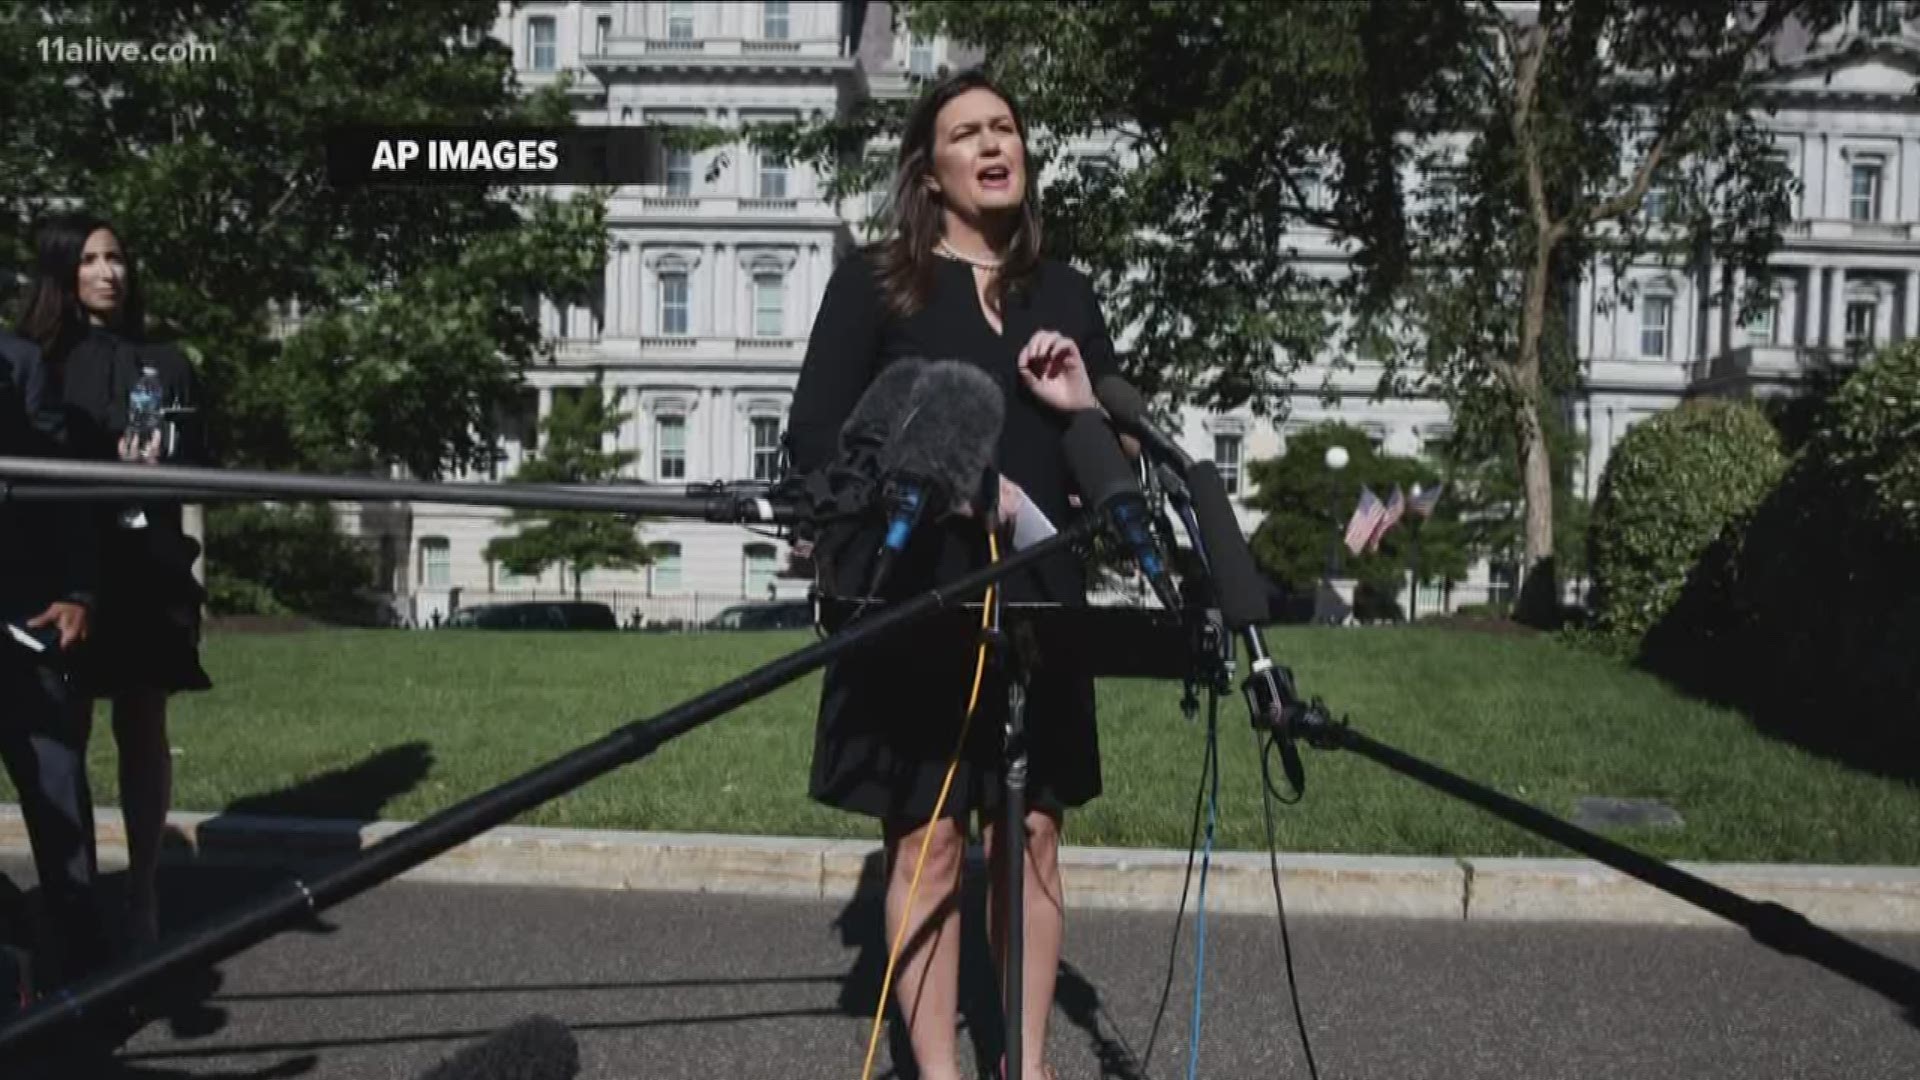 White House Press Secretary Sarah Huckabee Sanders will be leaving the Trump administration at the end of June, President Donald Trump announced Thursday afternoon.